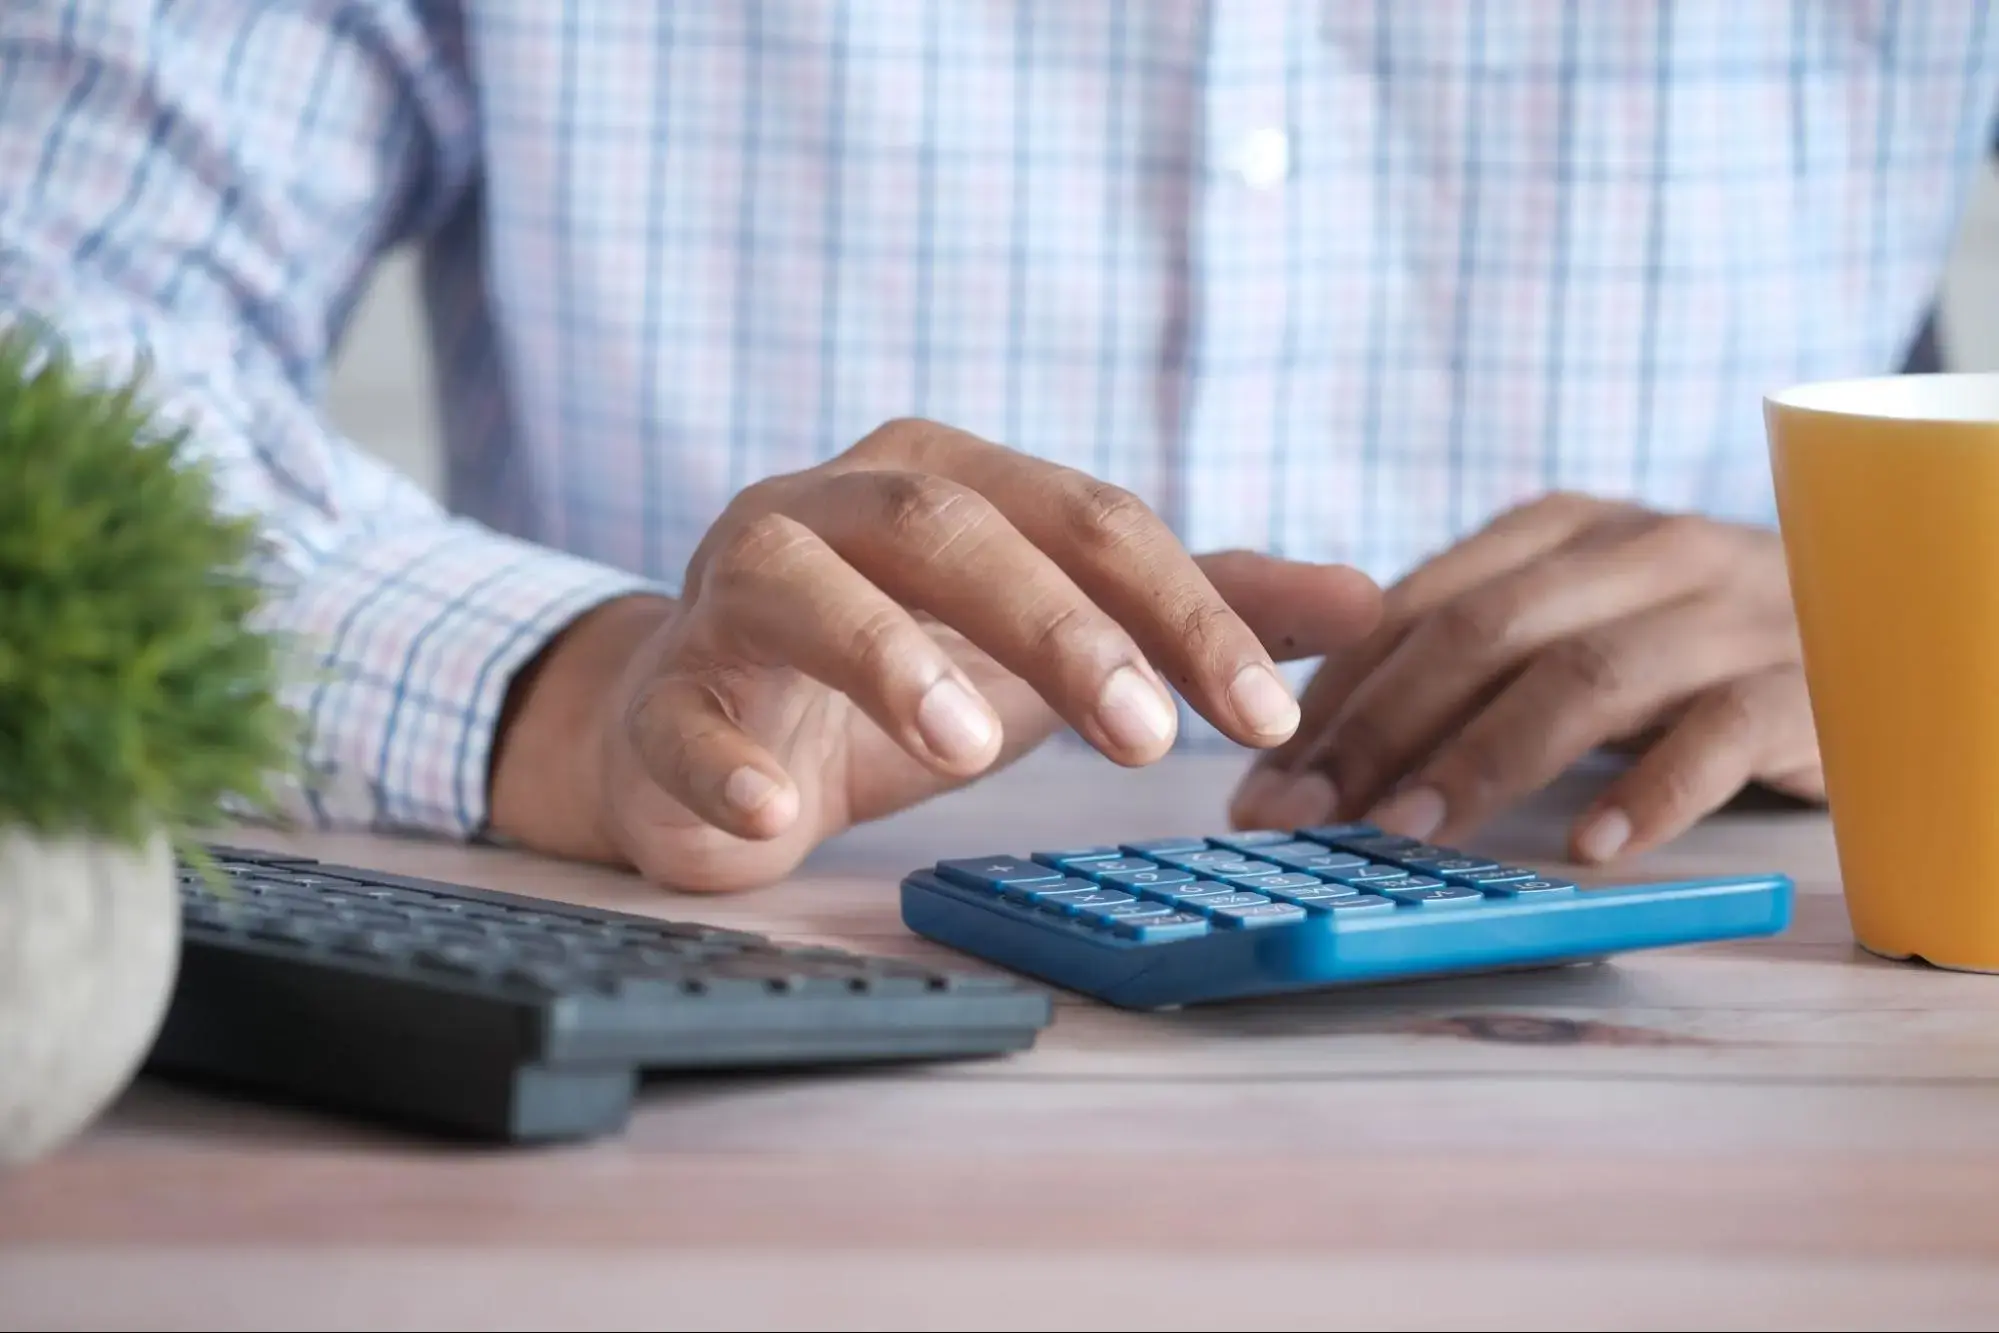 A person calculating their coinsurance amount.